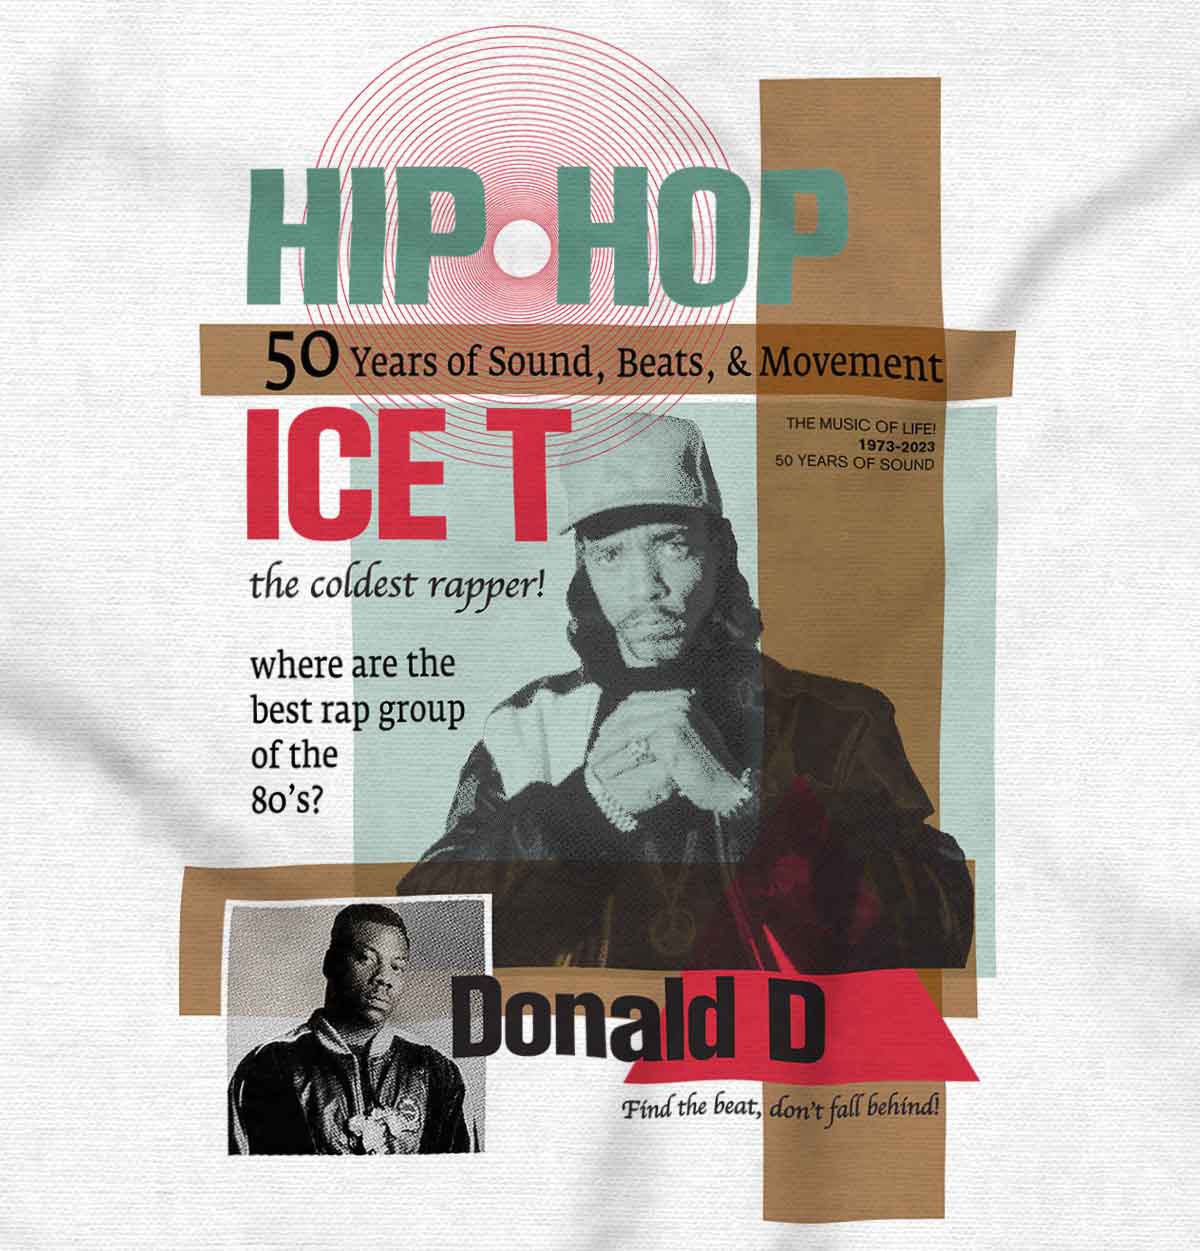 This image shows Ice T and Donald D, influential artists from the 80s Rhyme Syndicate group, help you find the rhythm.